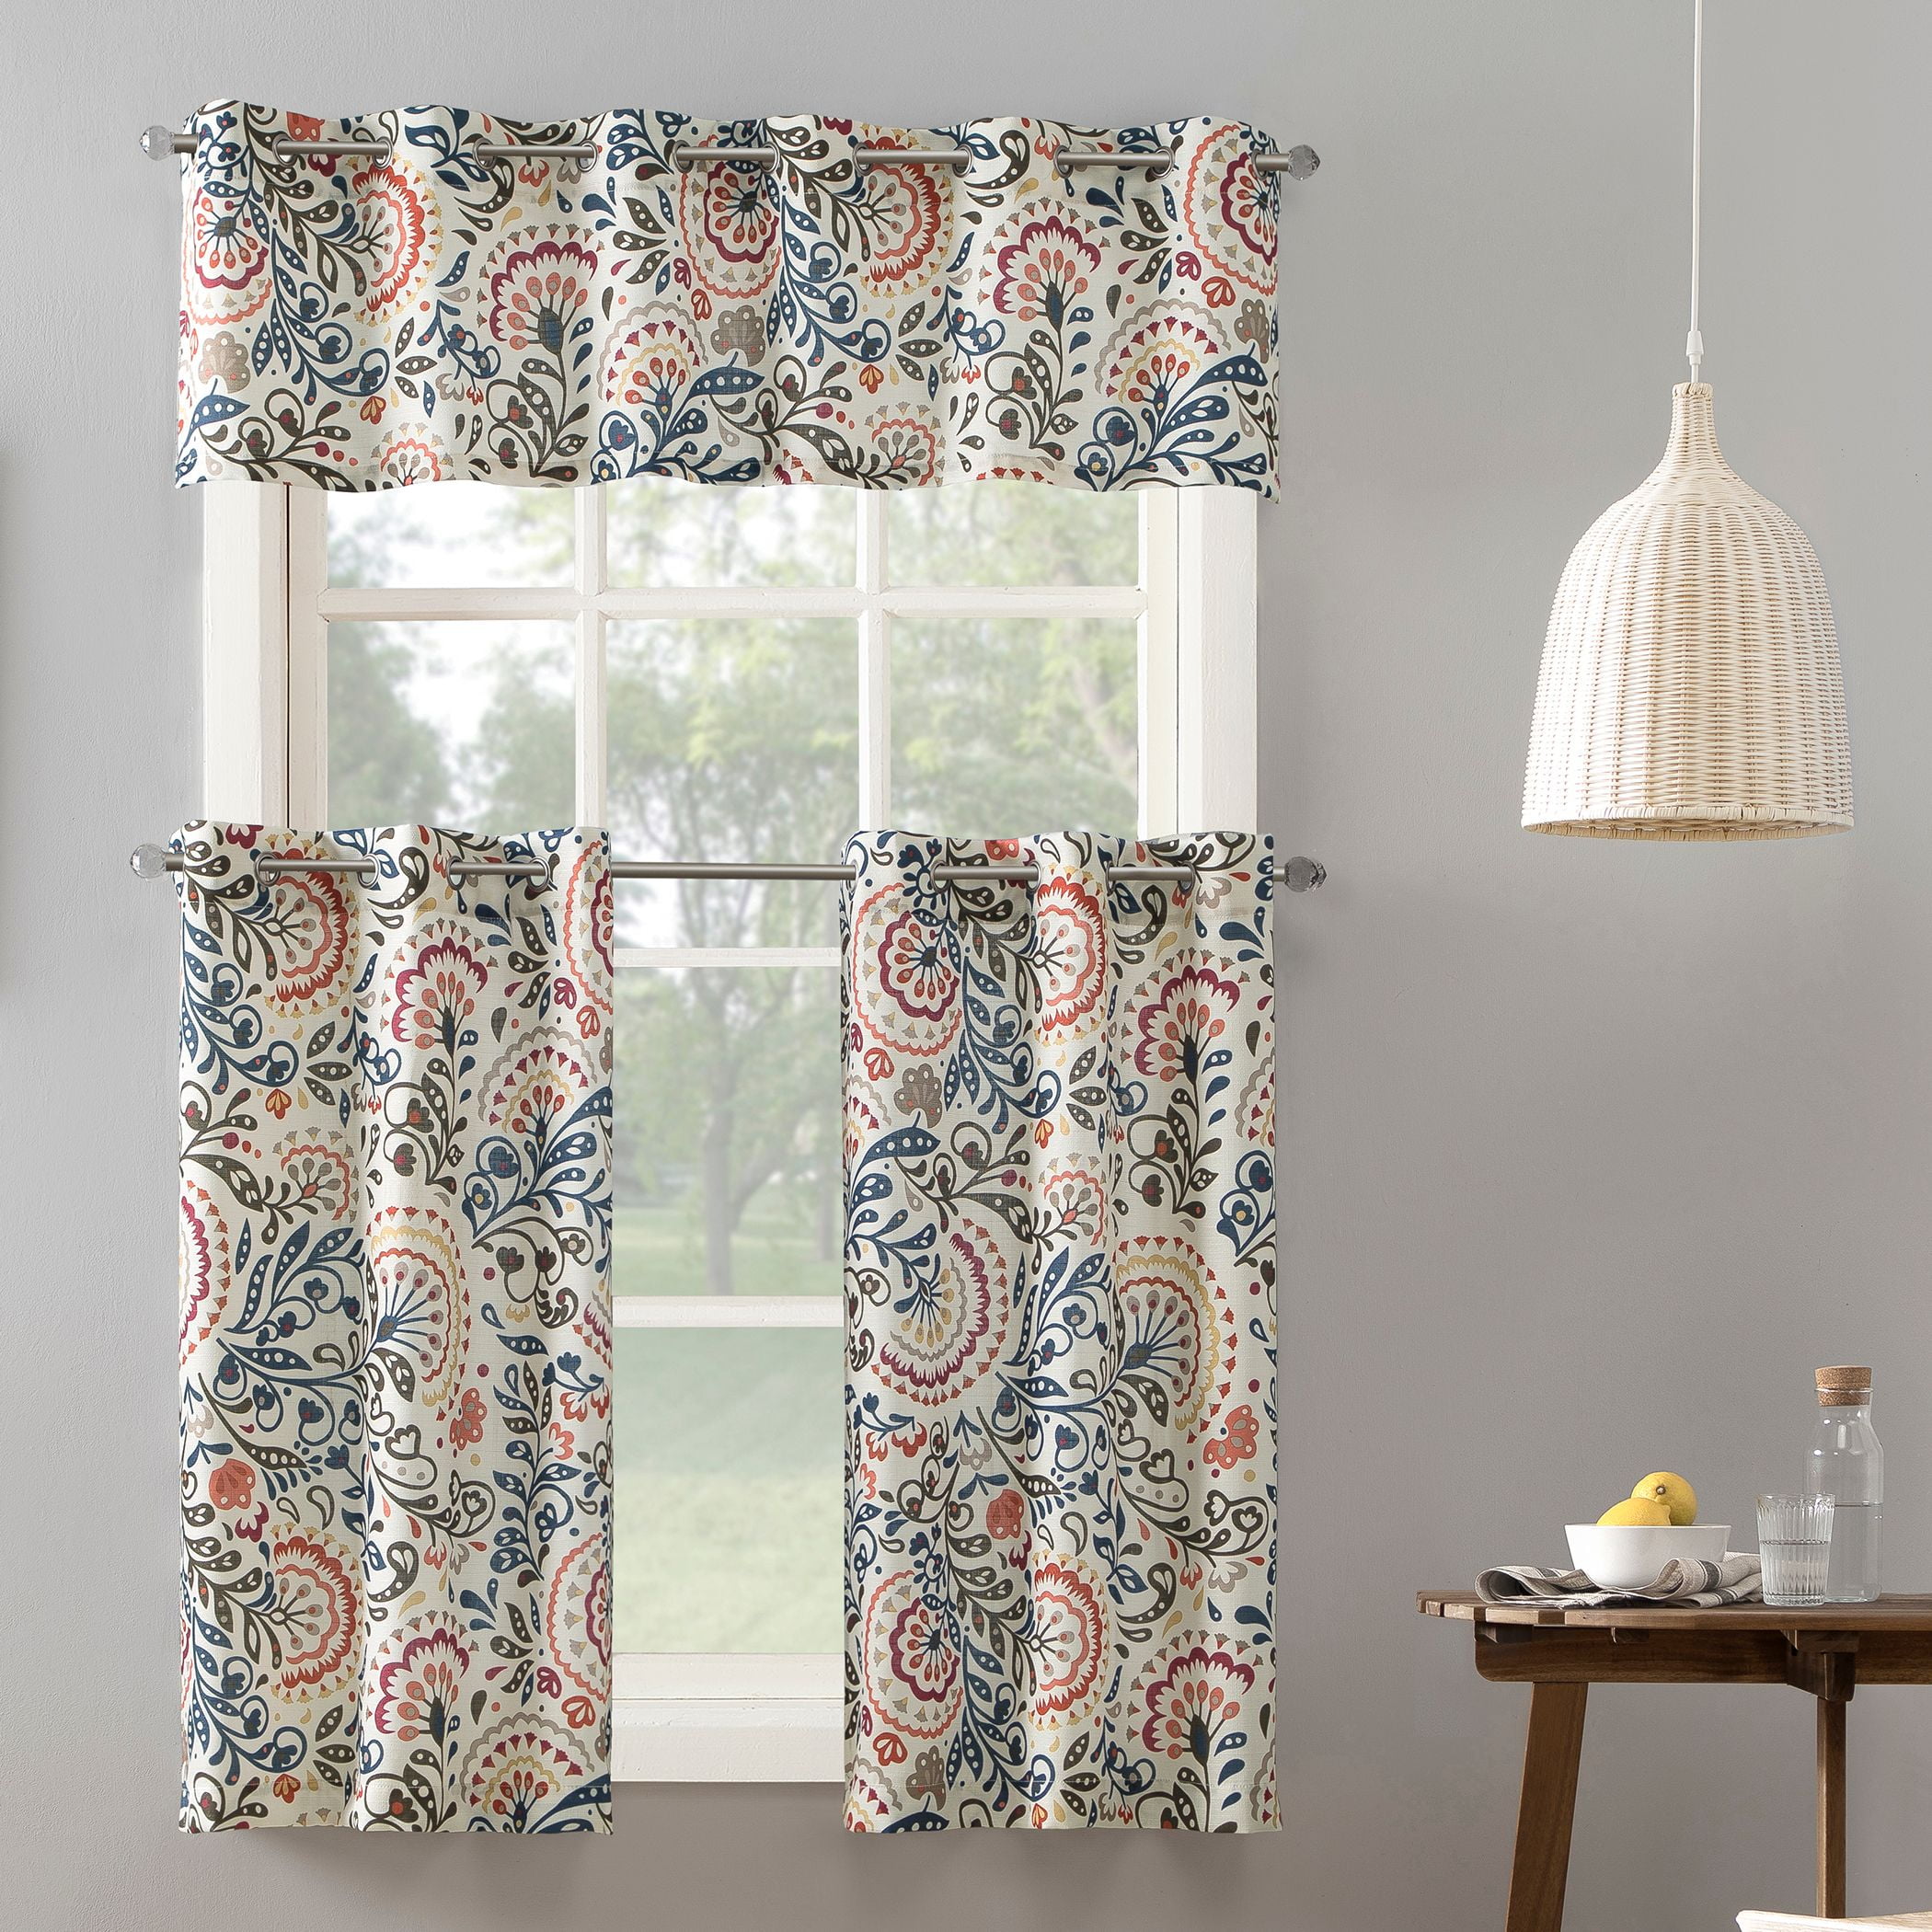 Buy Mainstays Elevated Solid 3 Piece Kitchen Curtain Set Online At Lowest Price In India 915087483 